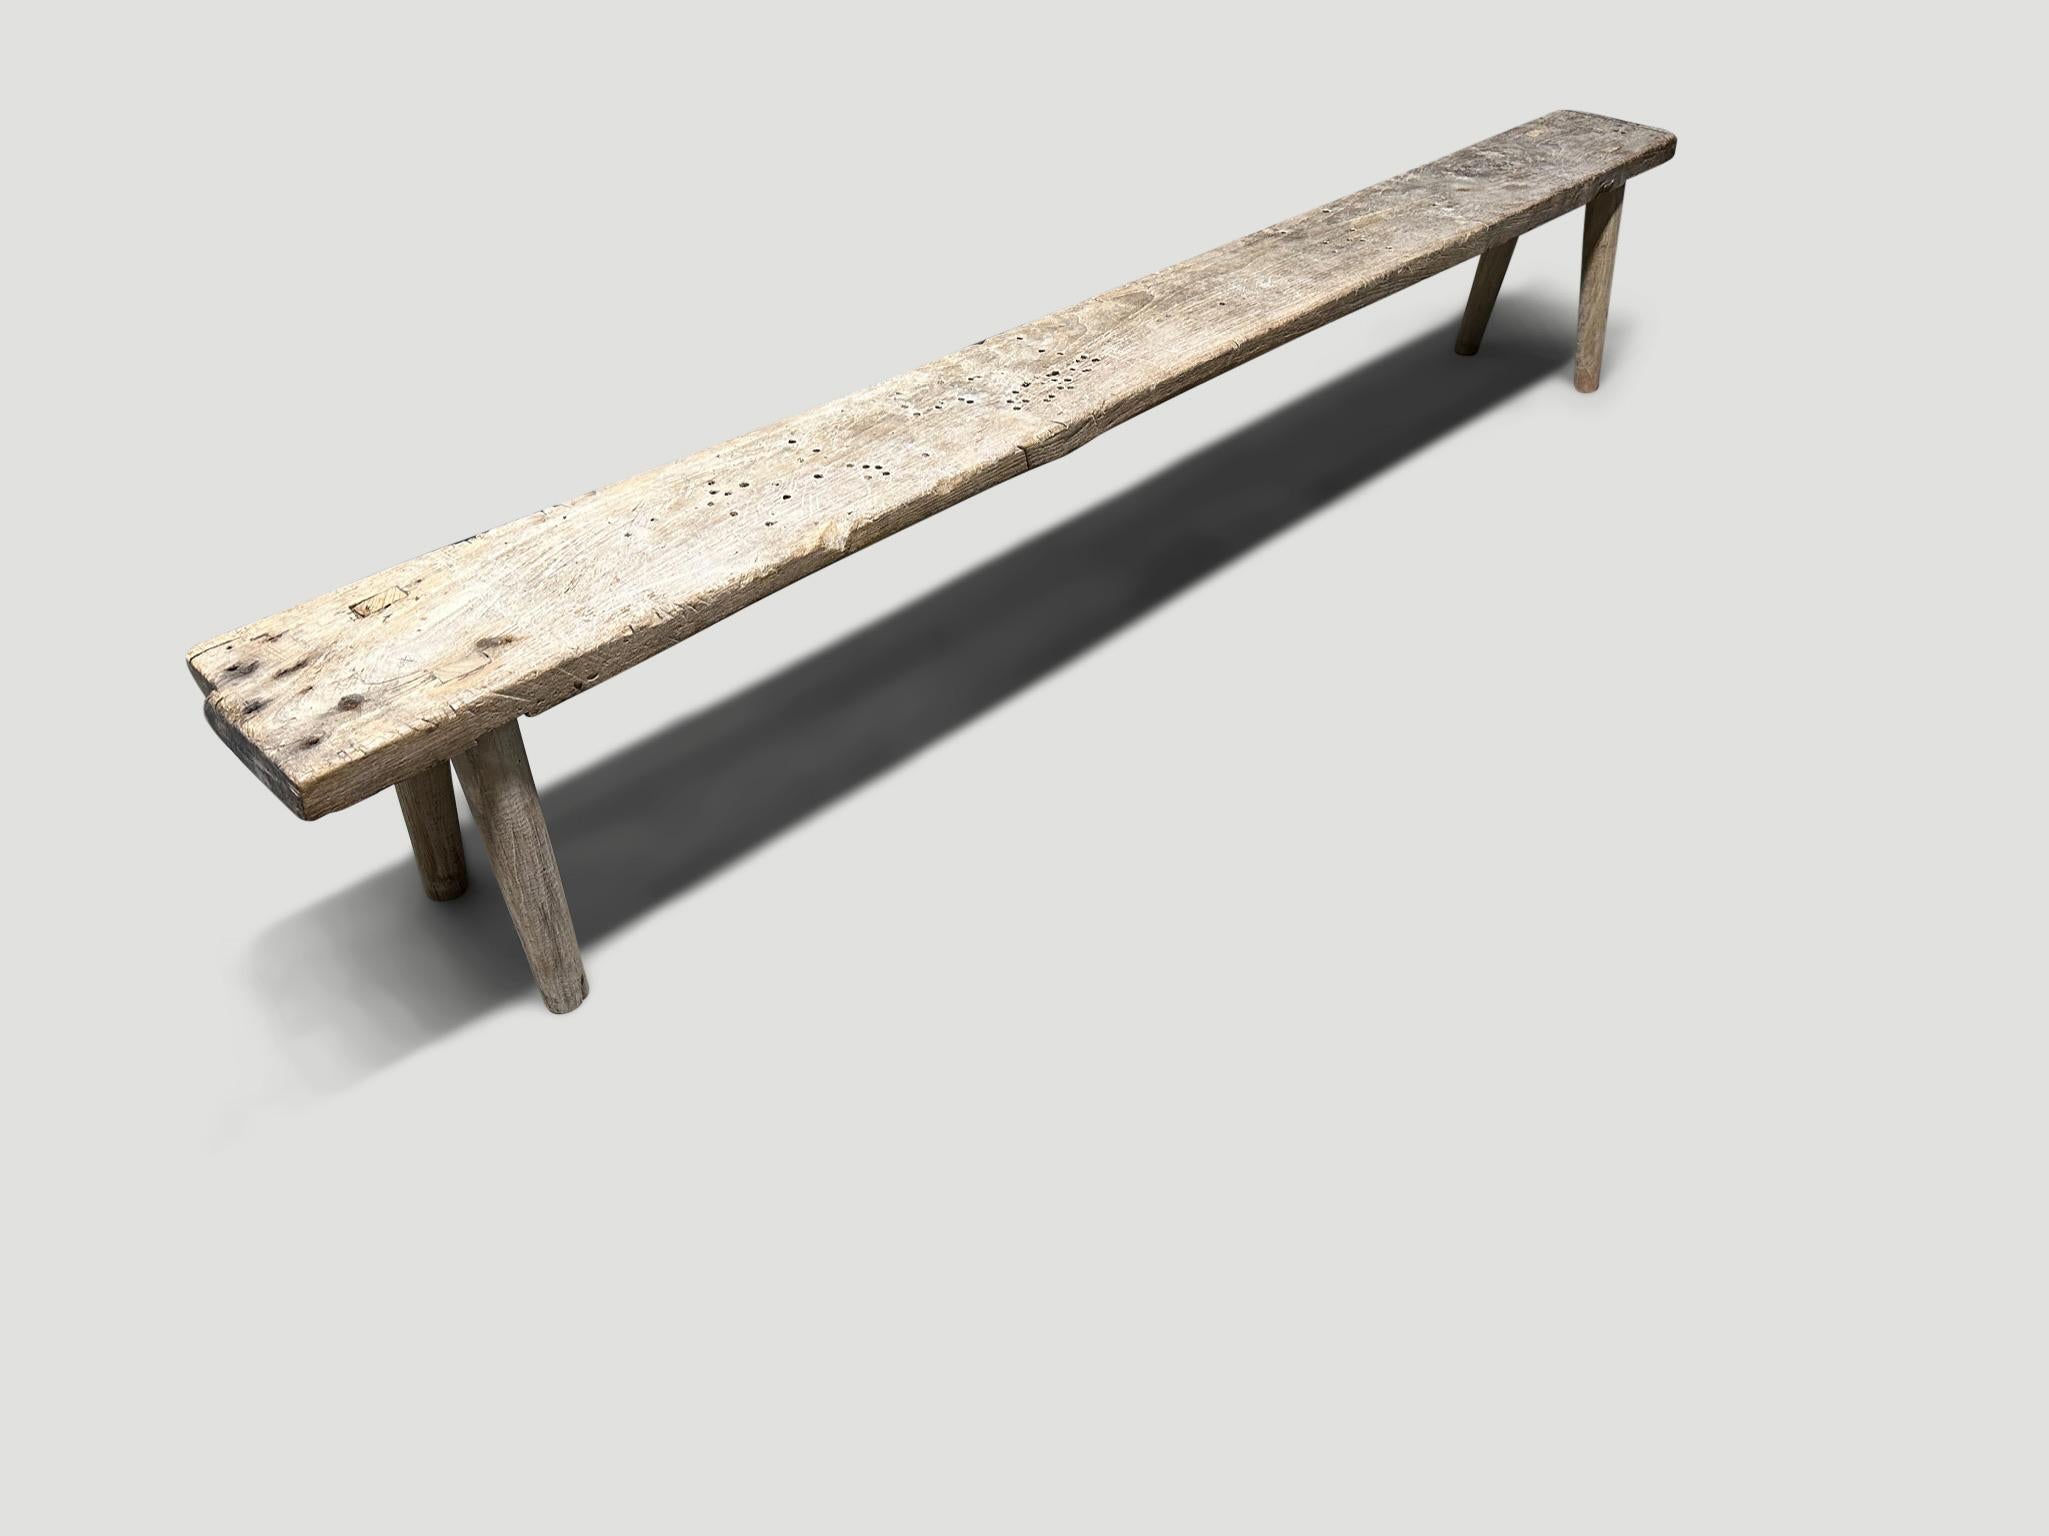 Andrianna Shamaris Wabi Sabi Long Teak Wood Bench  In Excellent Condition For Sale In New York, NY